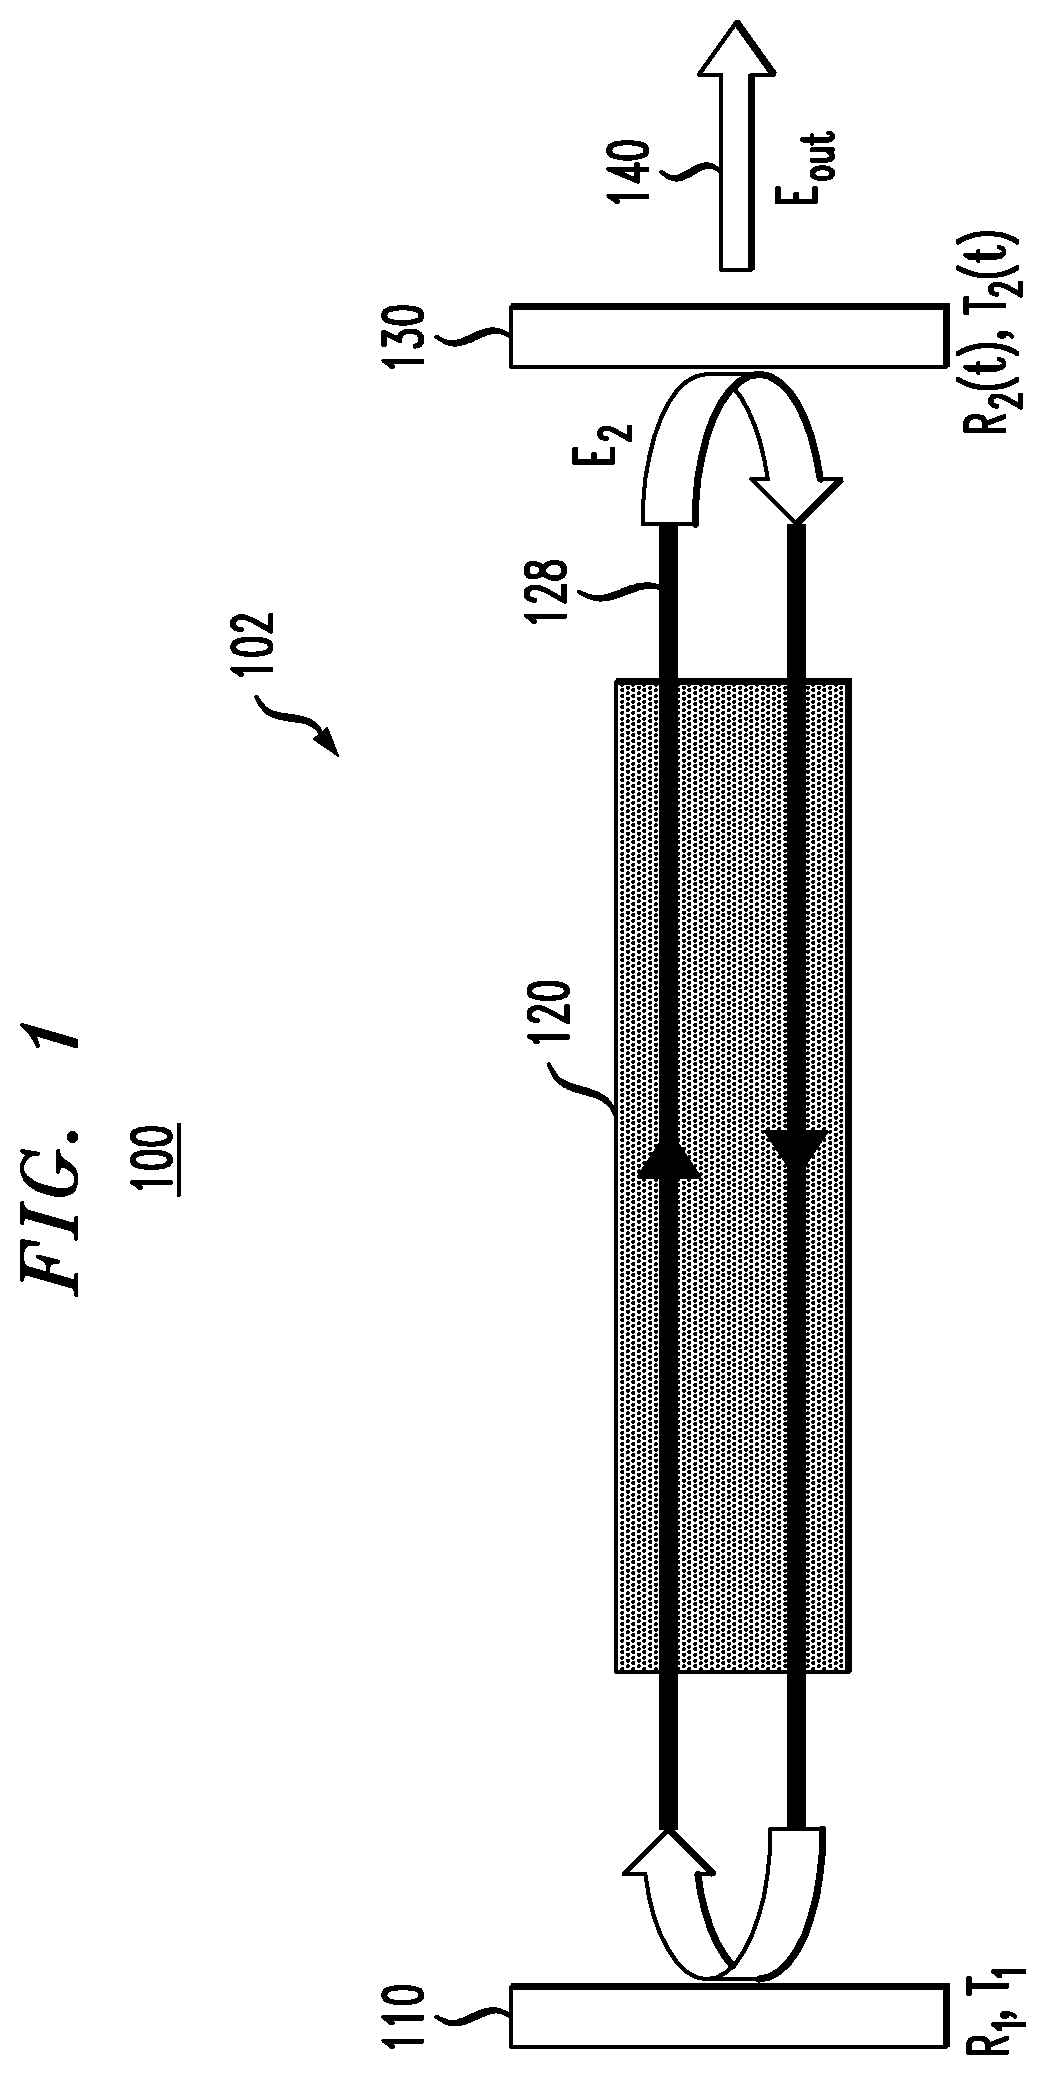 Directly modulated laser having a variable light reflector